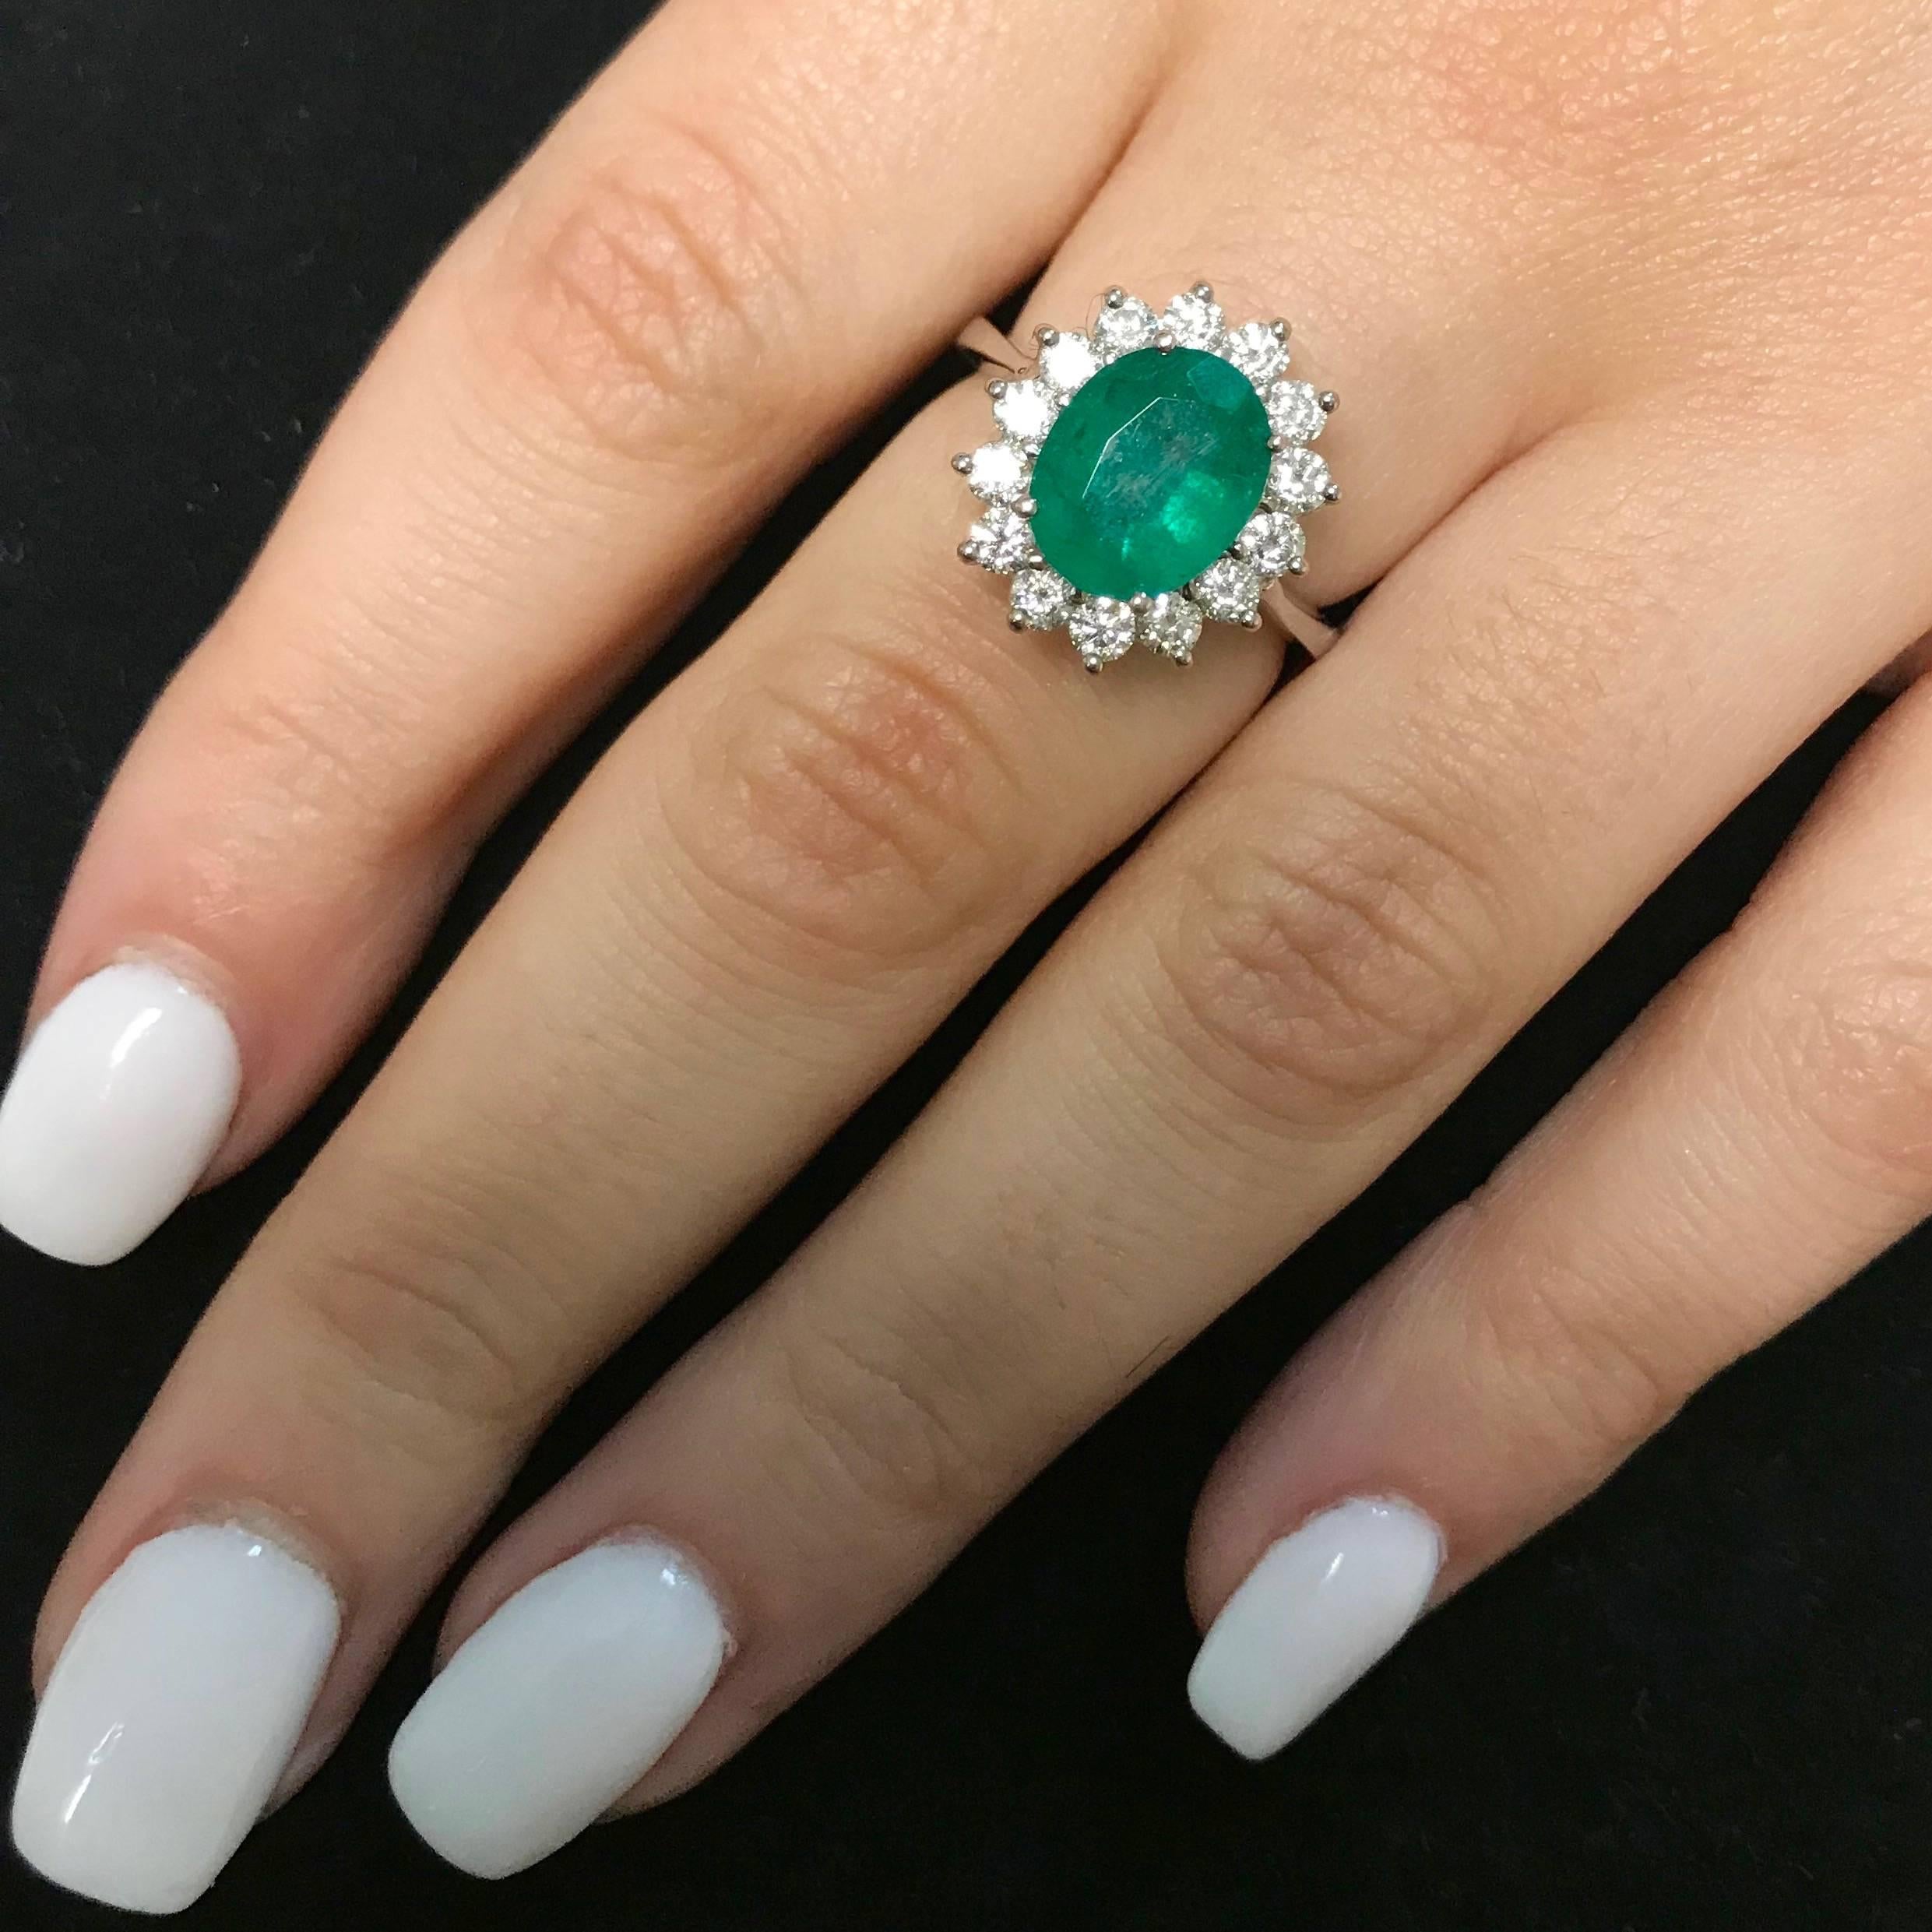 Material: 14k White Gold
Gemstones: 1 Oval Emerald at 2.51 Carats. Measuring 8 x 10 mm.
Diamonds: 14 Brilliant Round White Diamonds at 0.80 Carats. SI Clarity / H-I Color. 
Ring Size: 6.25 (Can be sized)

Fine one-of-a kind craftsmanship meets